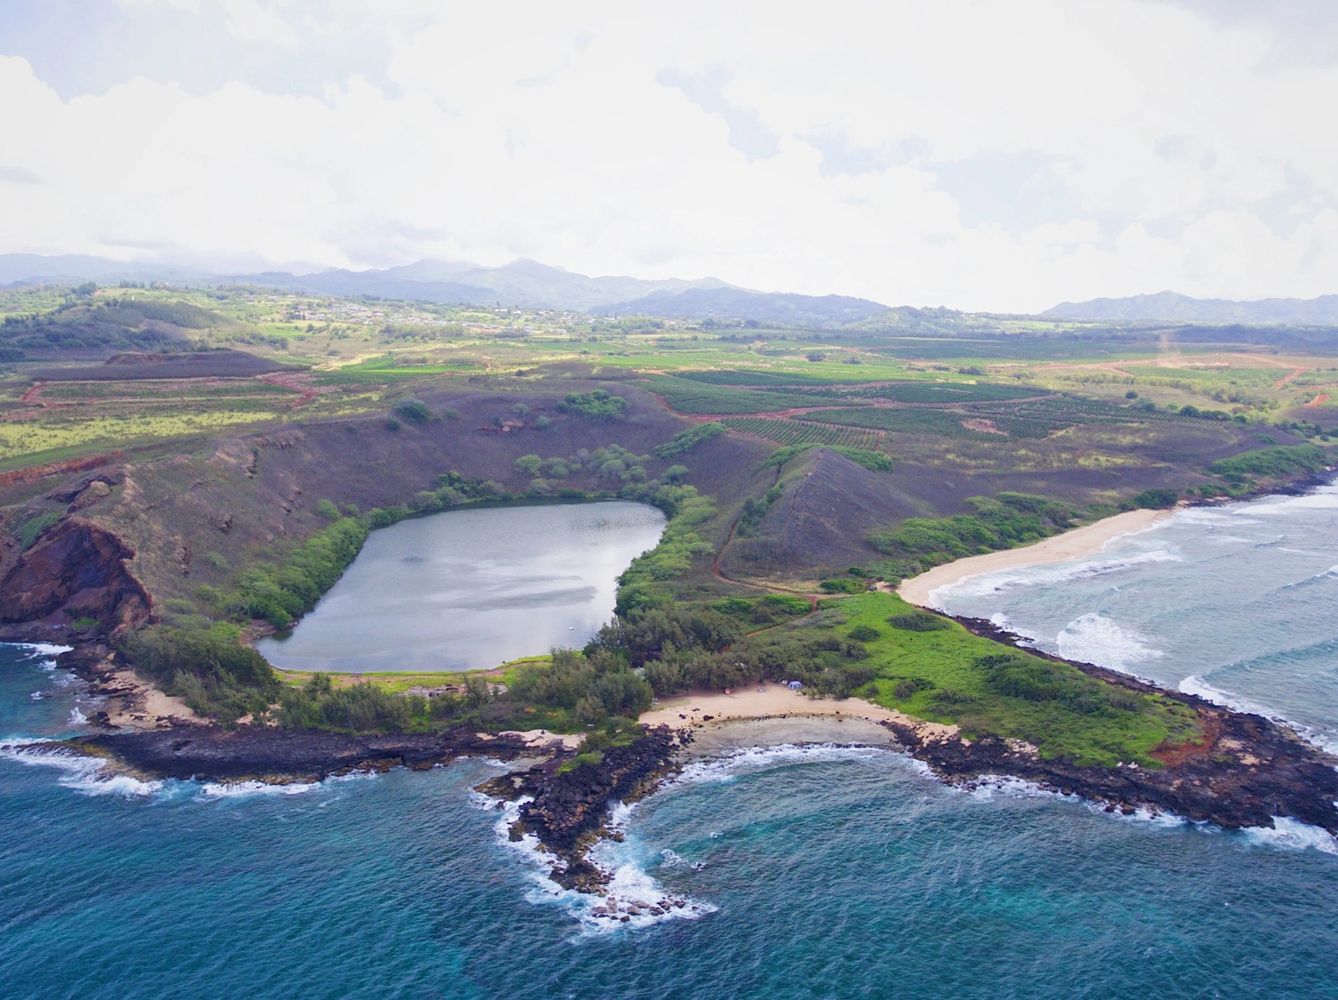 The Nomilo fishpond is an 18-acre brackish water natural ancient Hawaiian Fishpond.